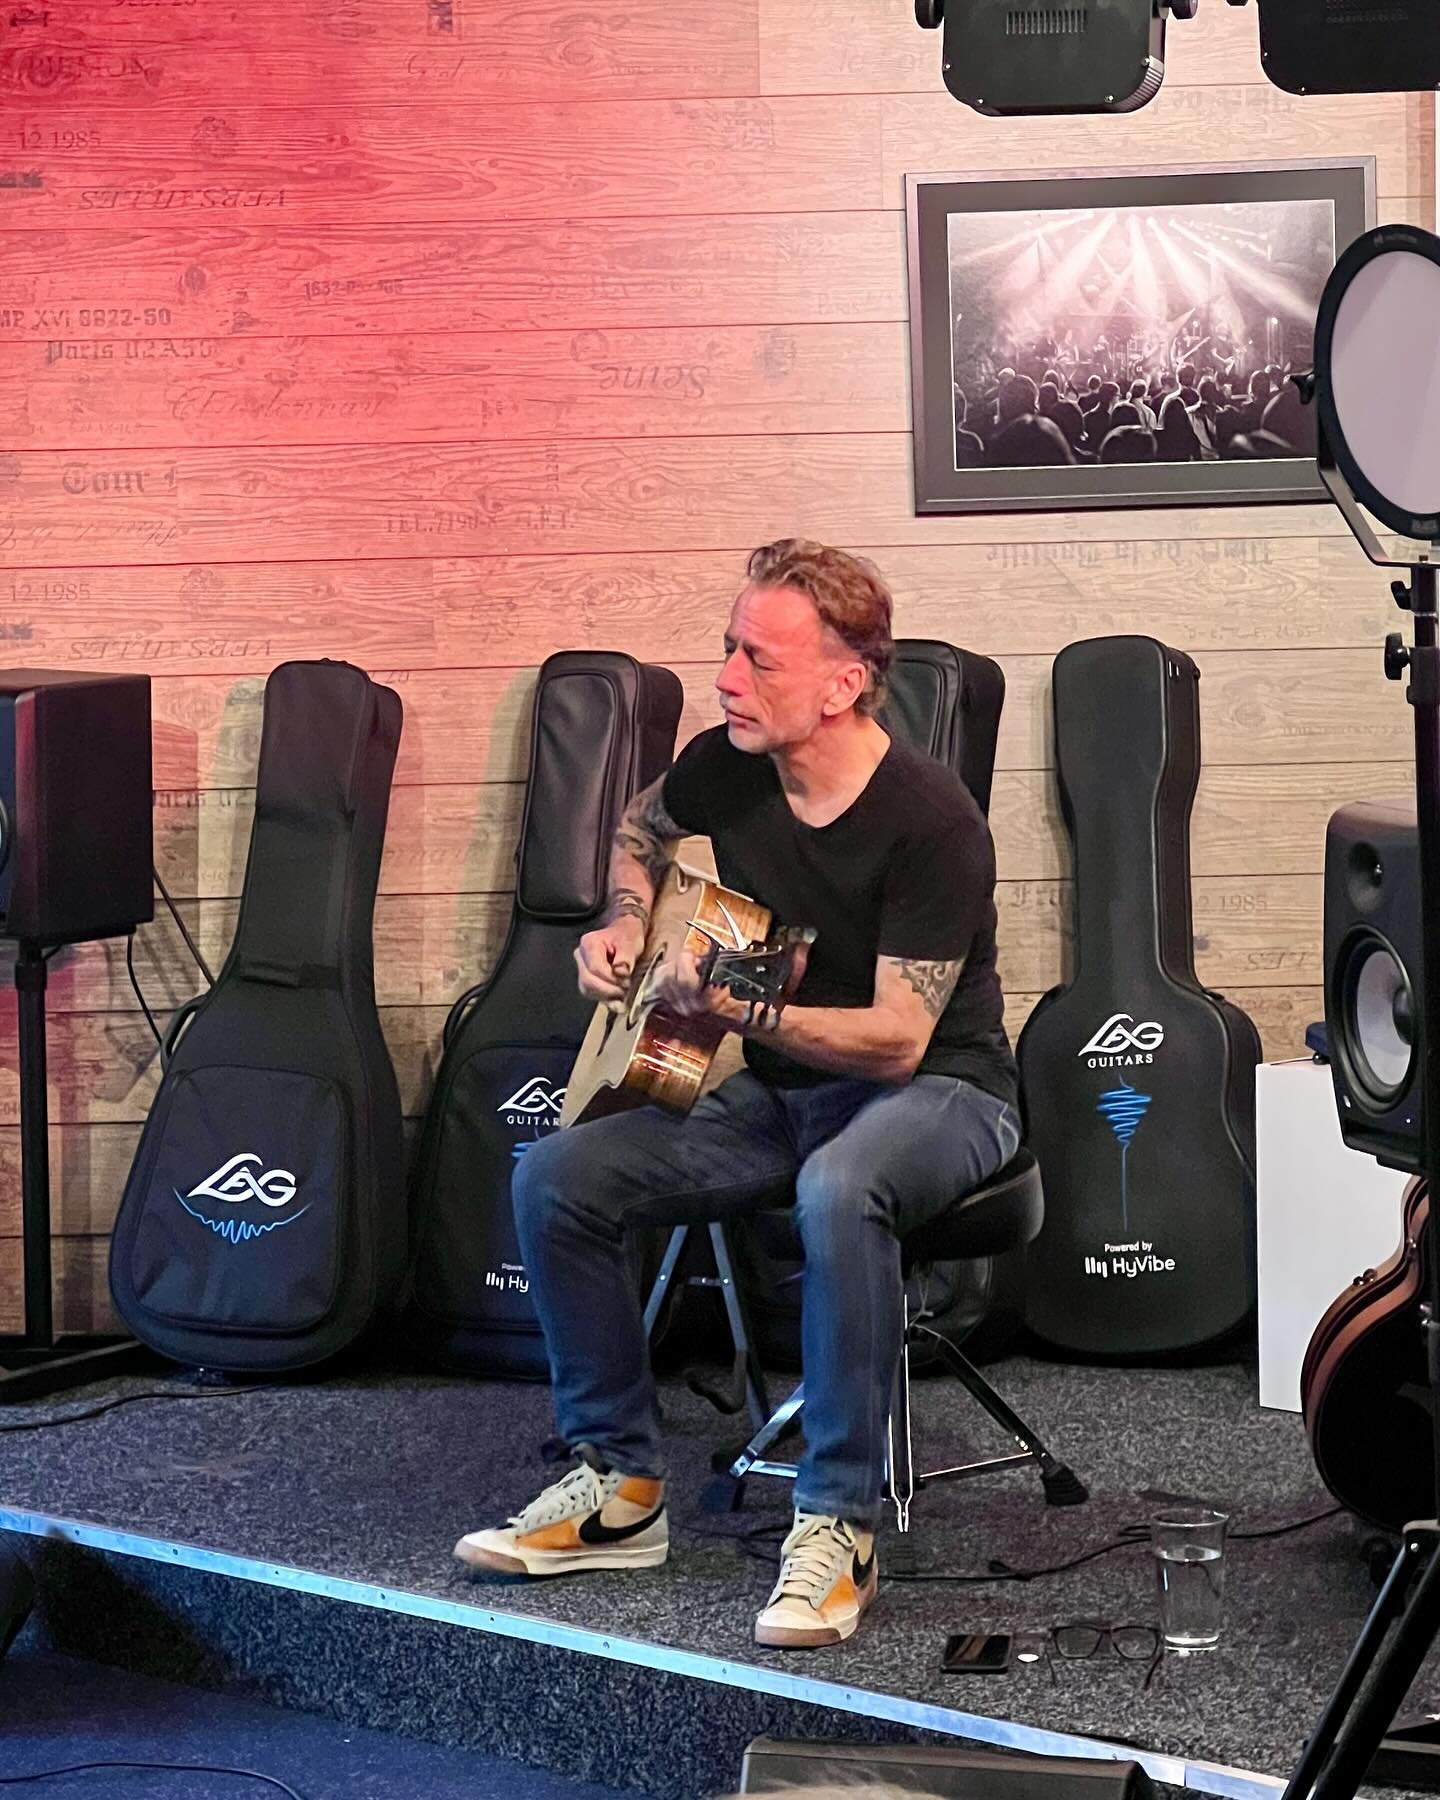 @the_guitarshop in Apeldoorn welcomed everyone on Saturday, May 4th for a free @lagguitars HyVibe Demo, presented by none other than @joostvergoossen !
&nbsp;
Huge gratitude to everyone who attended!&nbsp;🙏
&nbsp;
🥹 Missed it?&nbsp;
&nbsp;
Don&rsqu